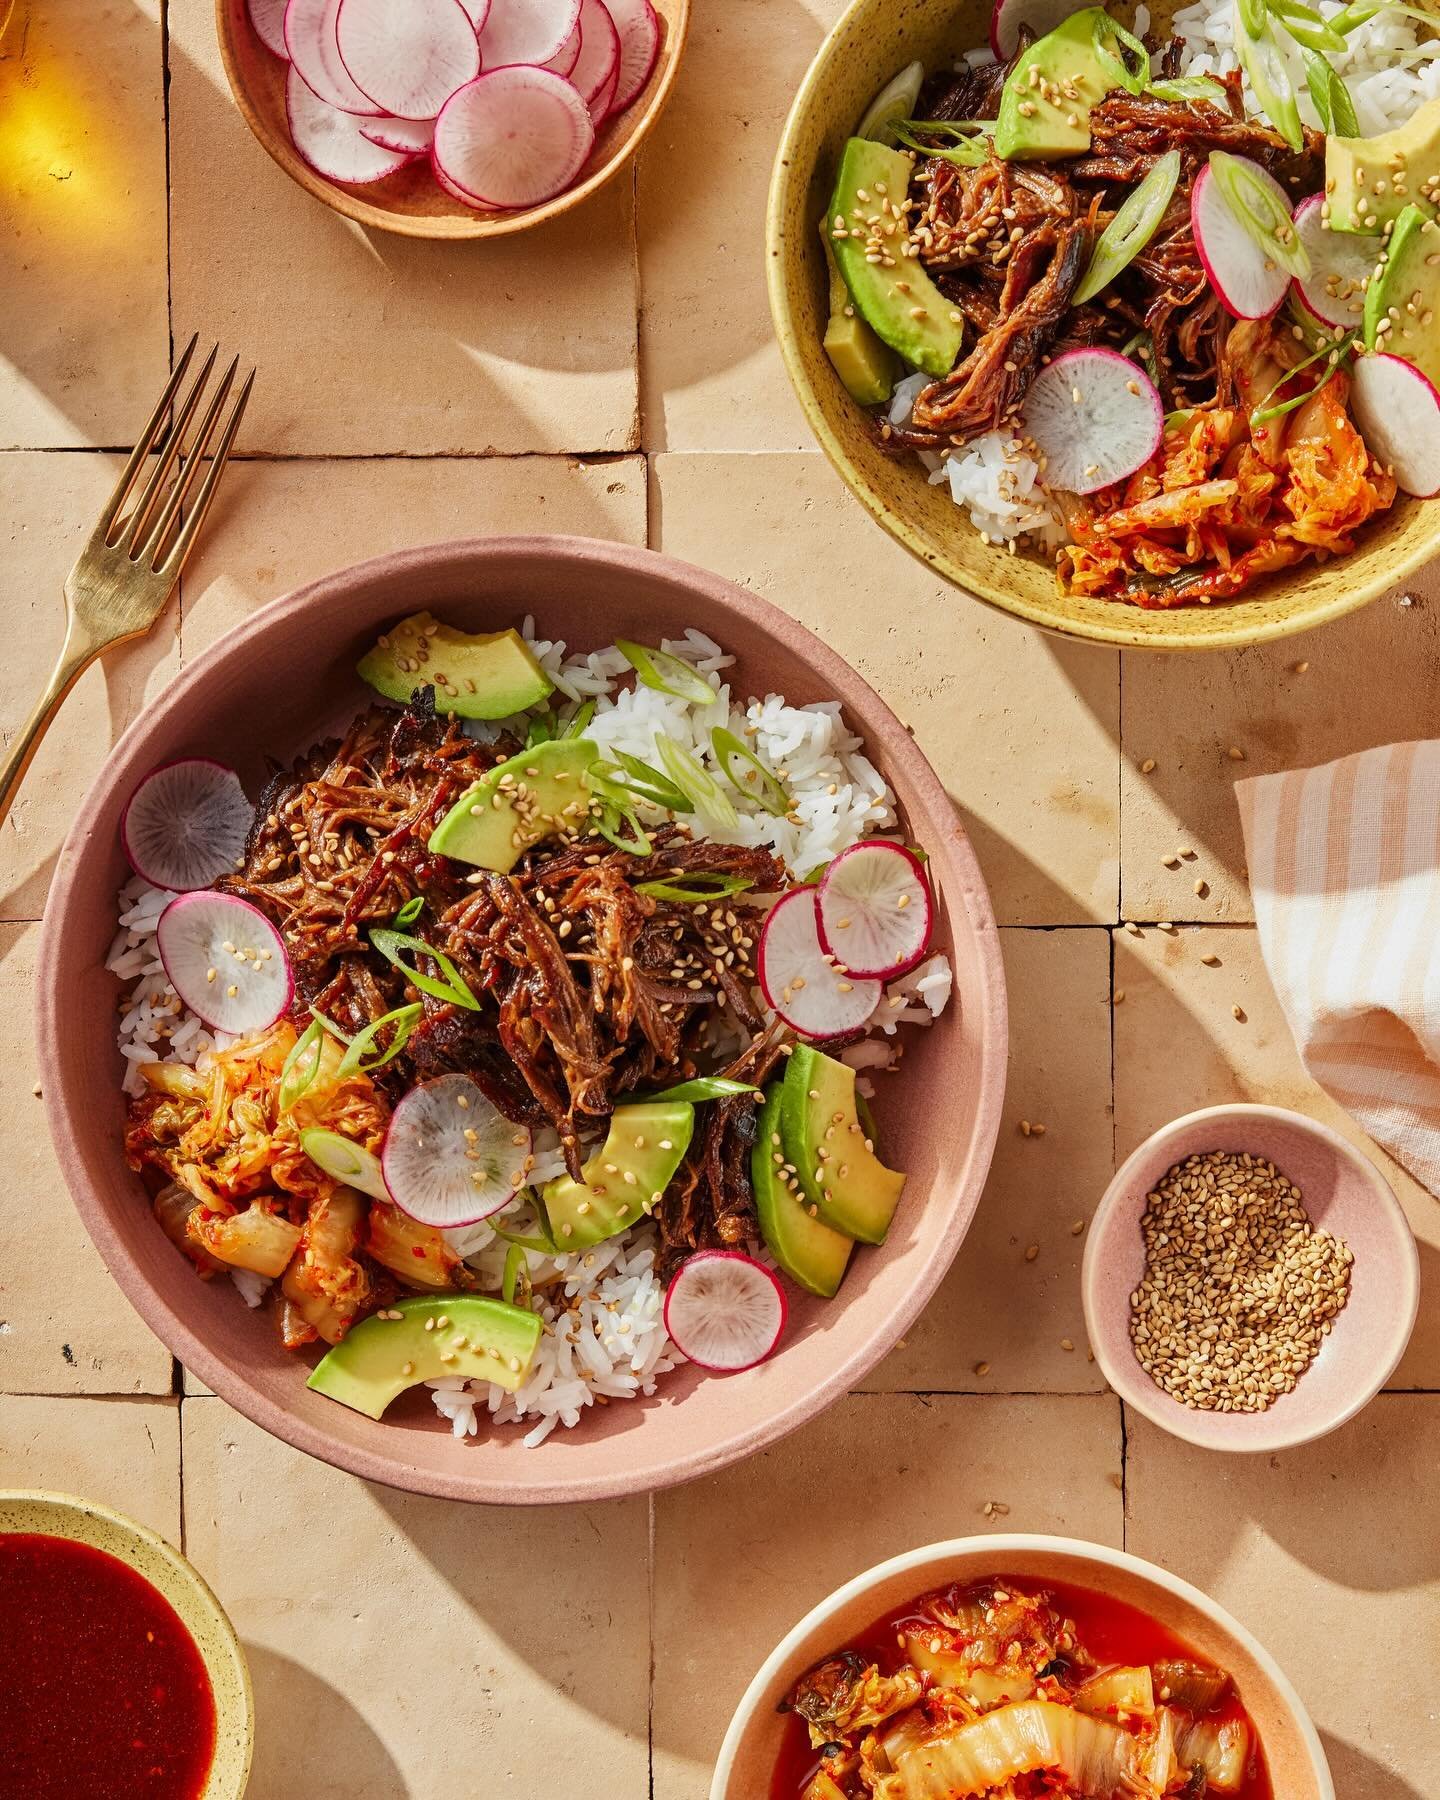 My favorite recipe from the book deserves a spotlight moment - the Gochujang Beef Bowls. 

A spicy paste used in Korean cooking, gochujang is made from red chili peppers and fermented soybeans, providing all the salty, sweet and tangy flavors mixed w